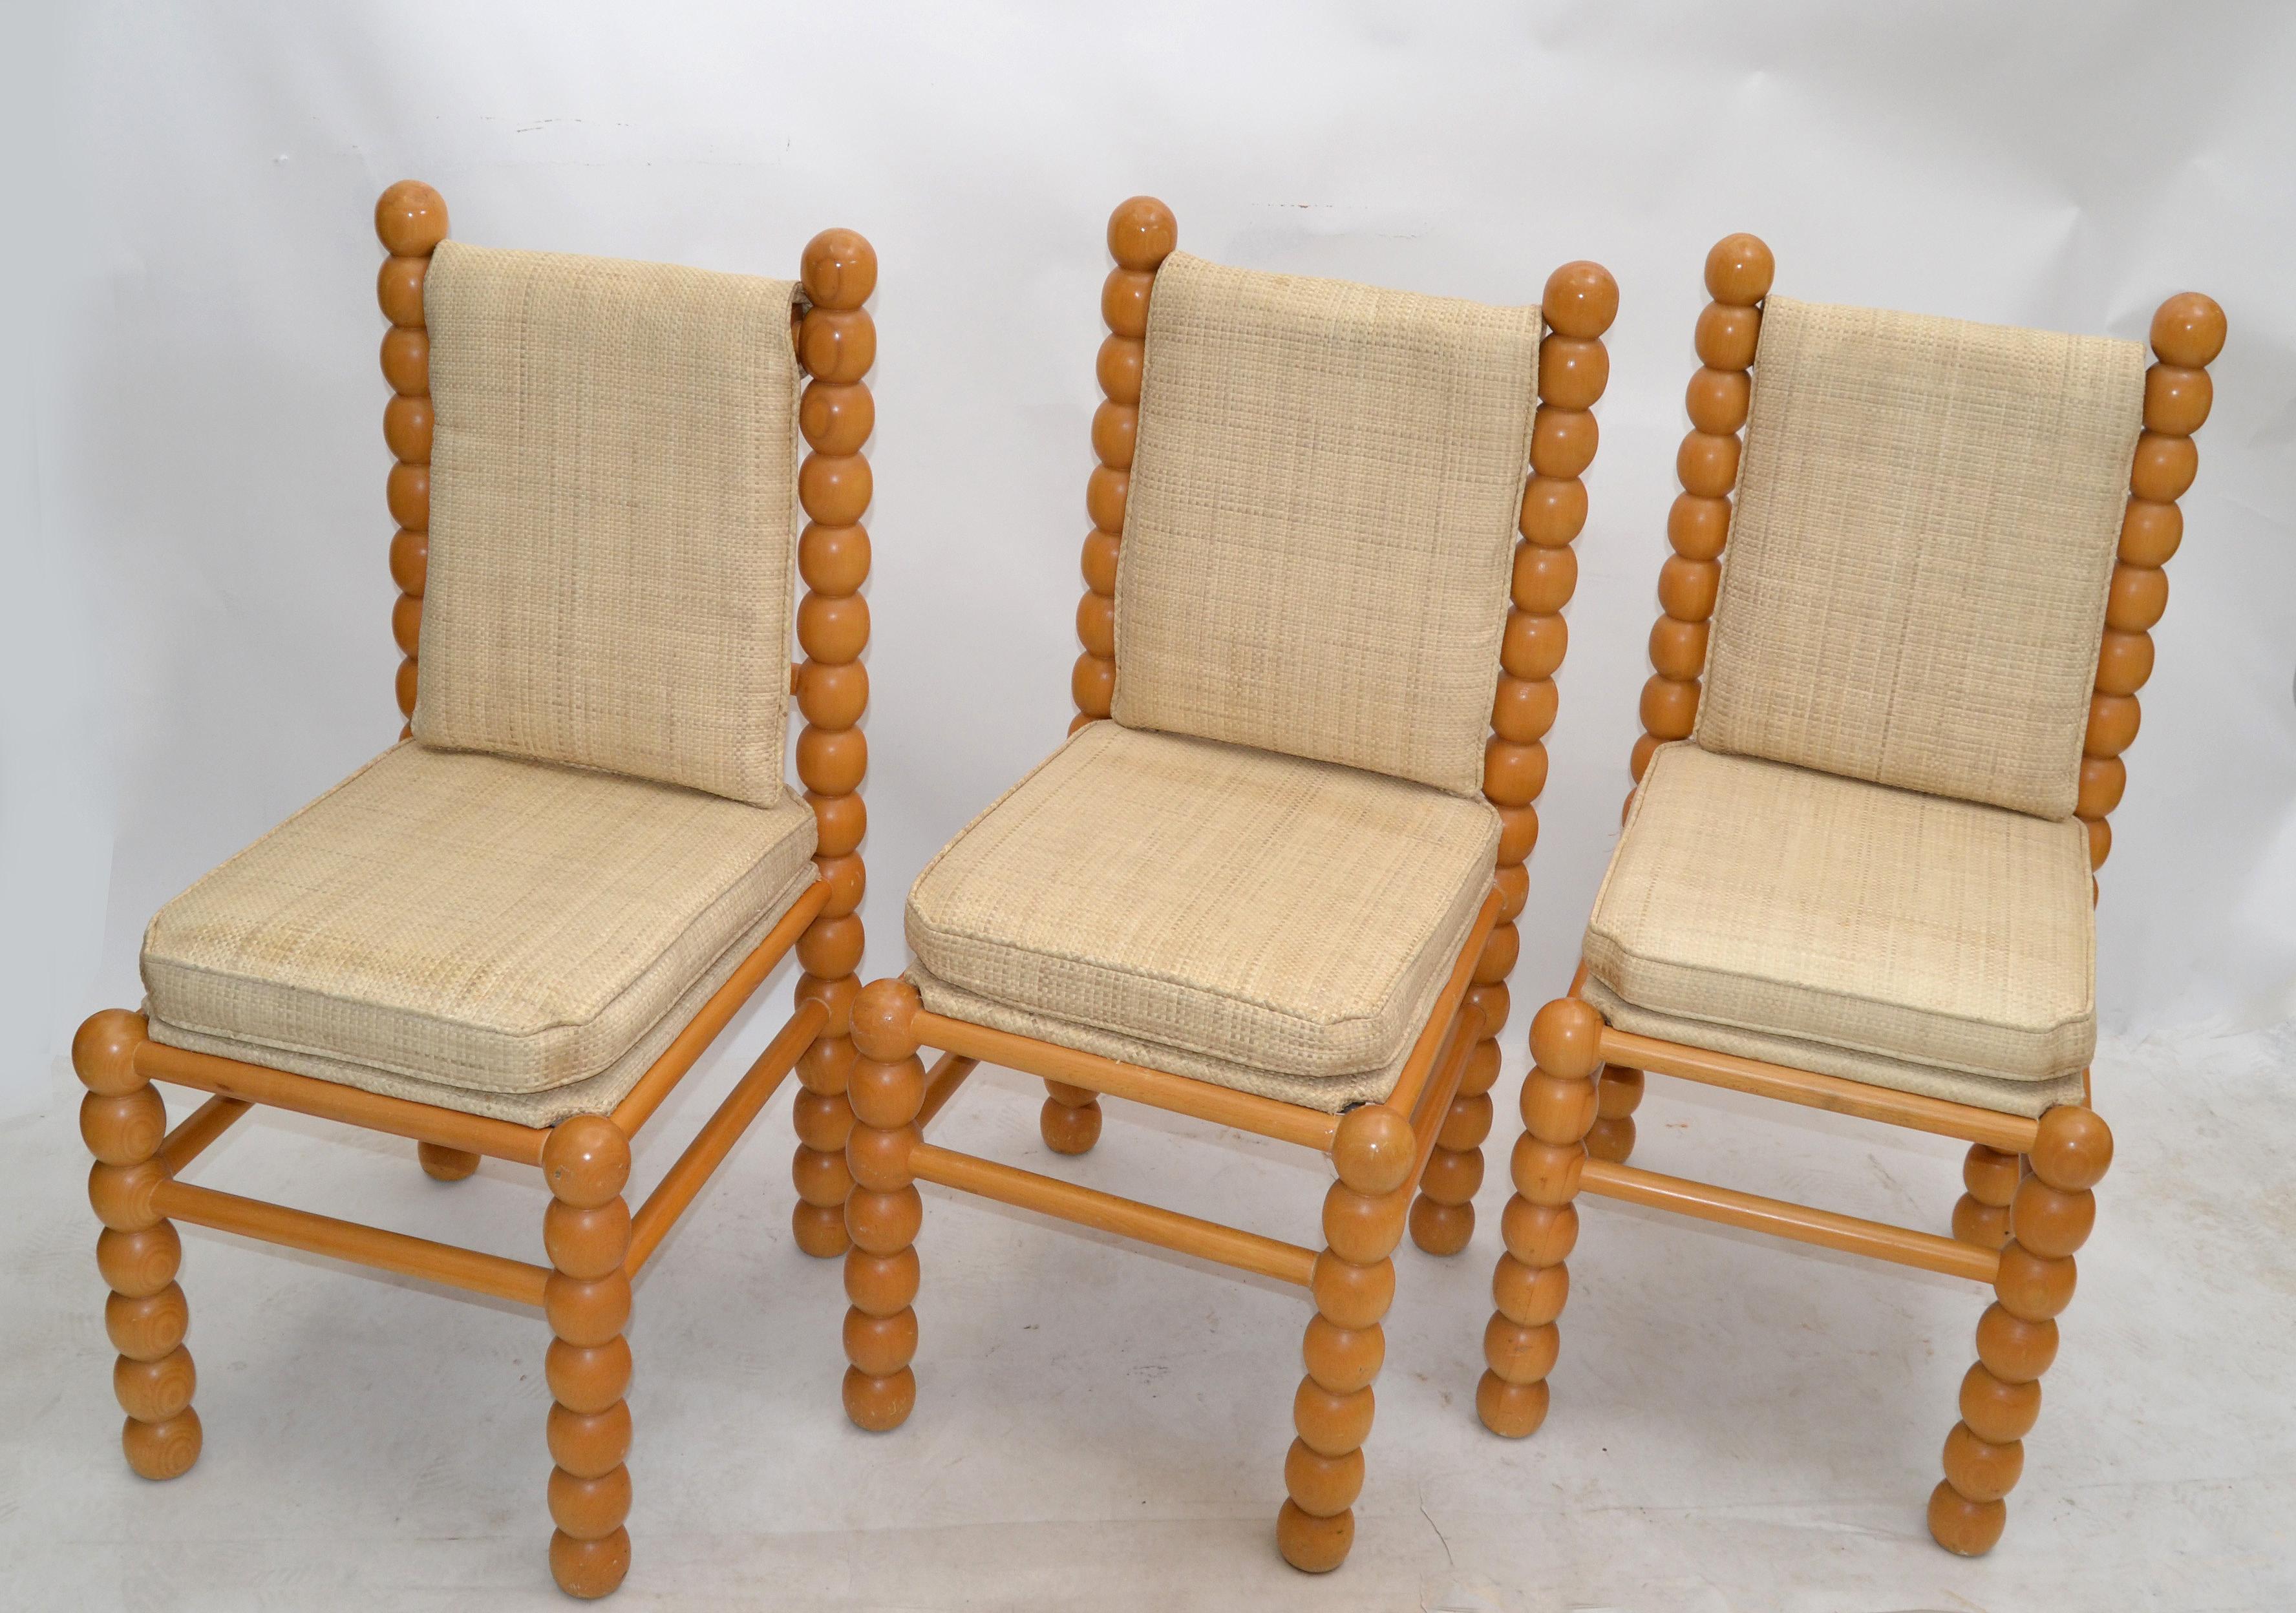 Turned Birch Wood & Fabric Upholstery Dining Chair Mid-Century Modern, Set of 3 For Sale 6